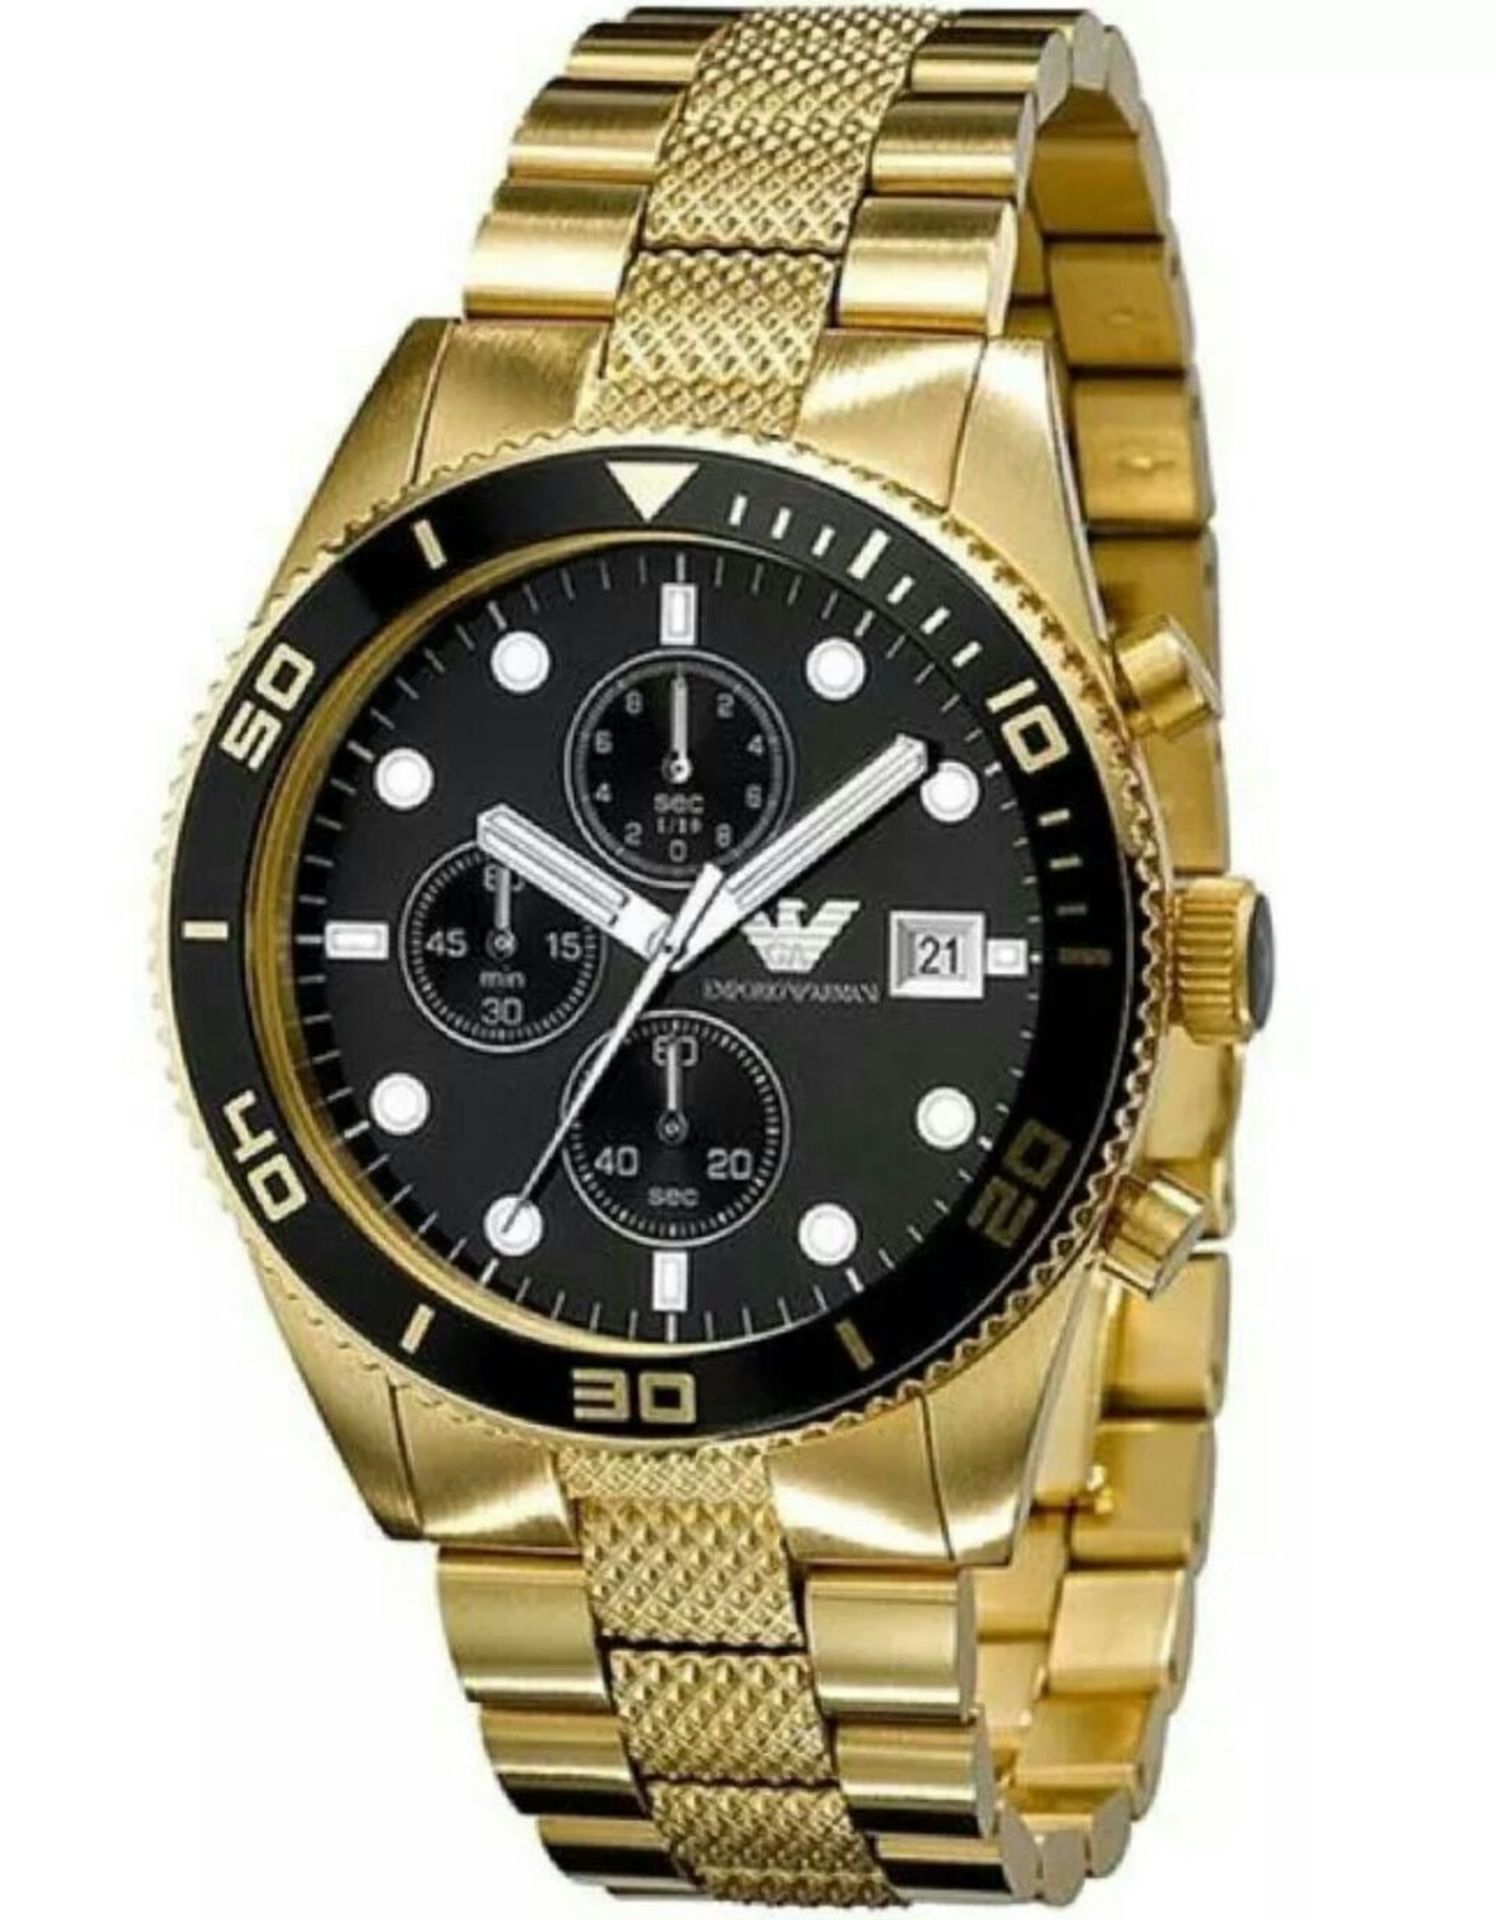 BRAND NEW EMPORIO ARMANI AR5857, GENTS GOLD COLOURED BRACELET CHRONOGRAPH WATCH WITH A BLACK